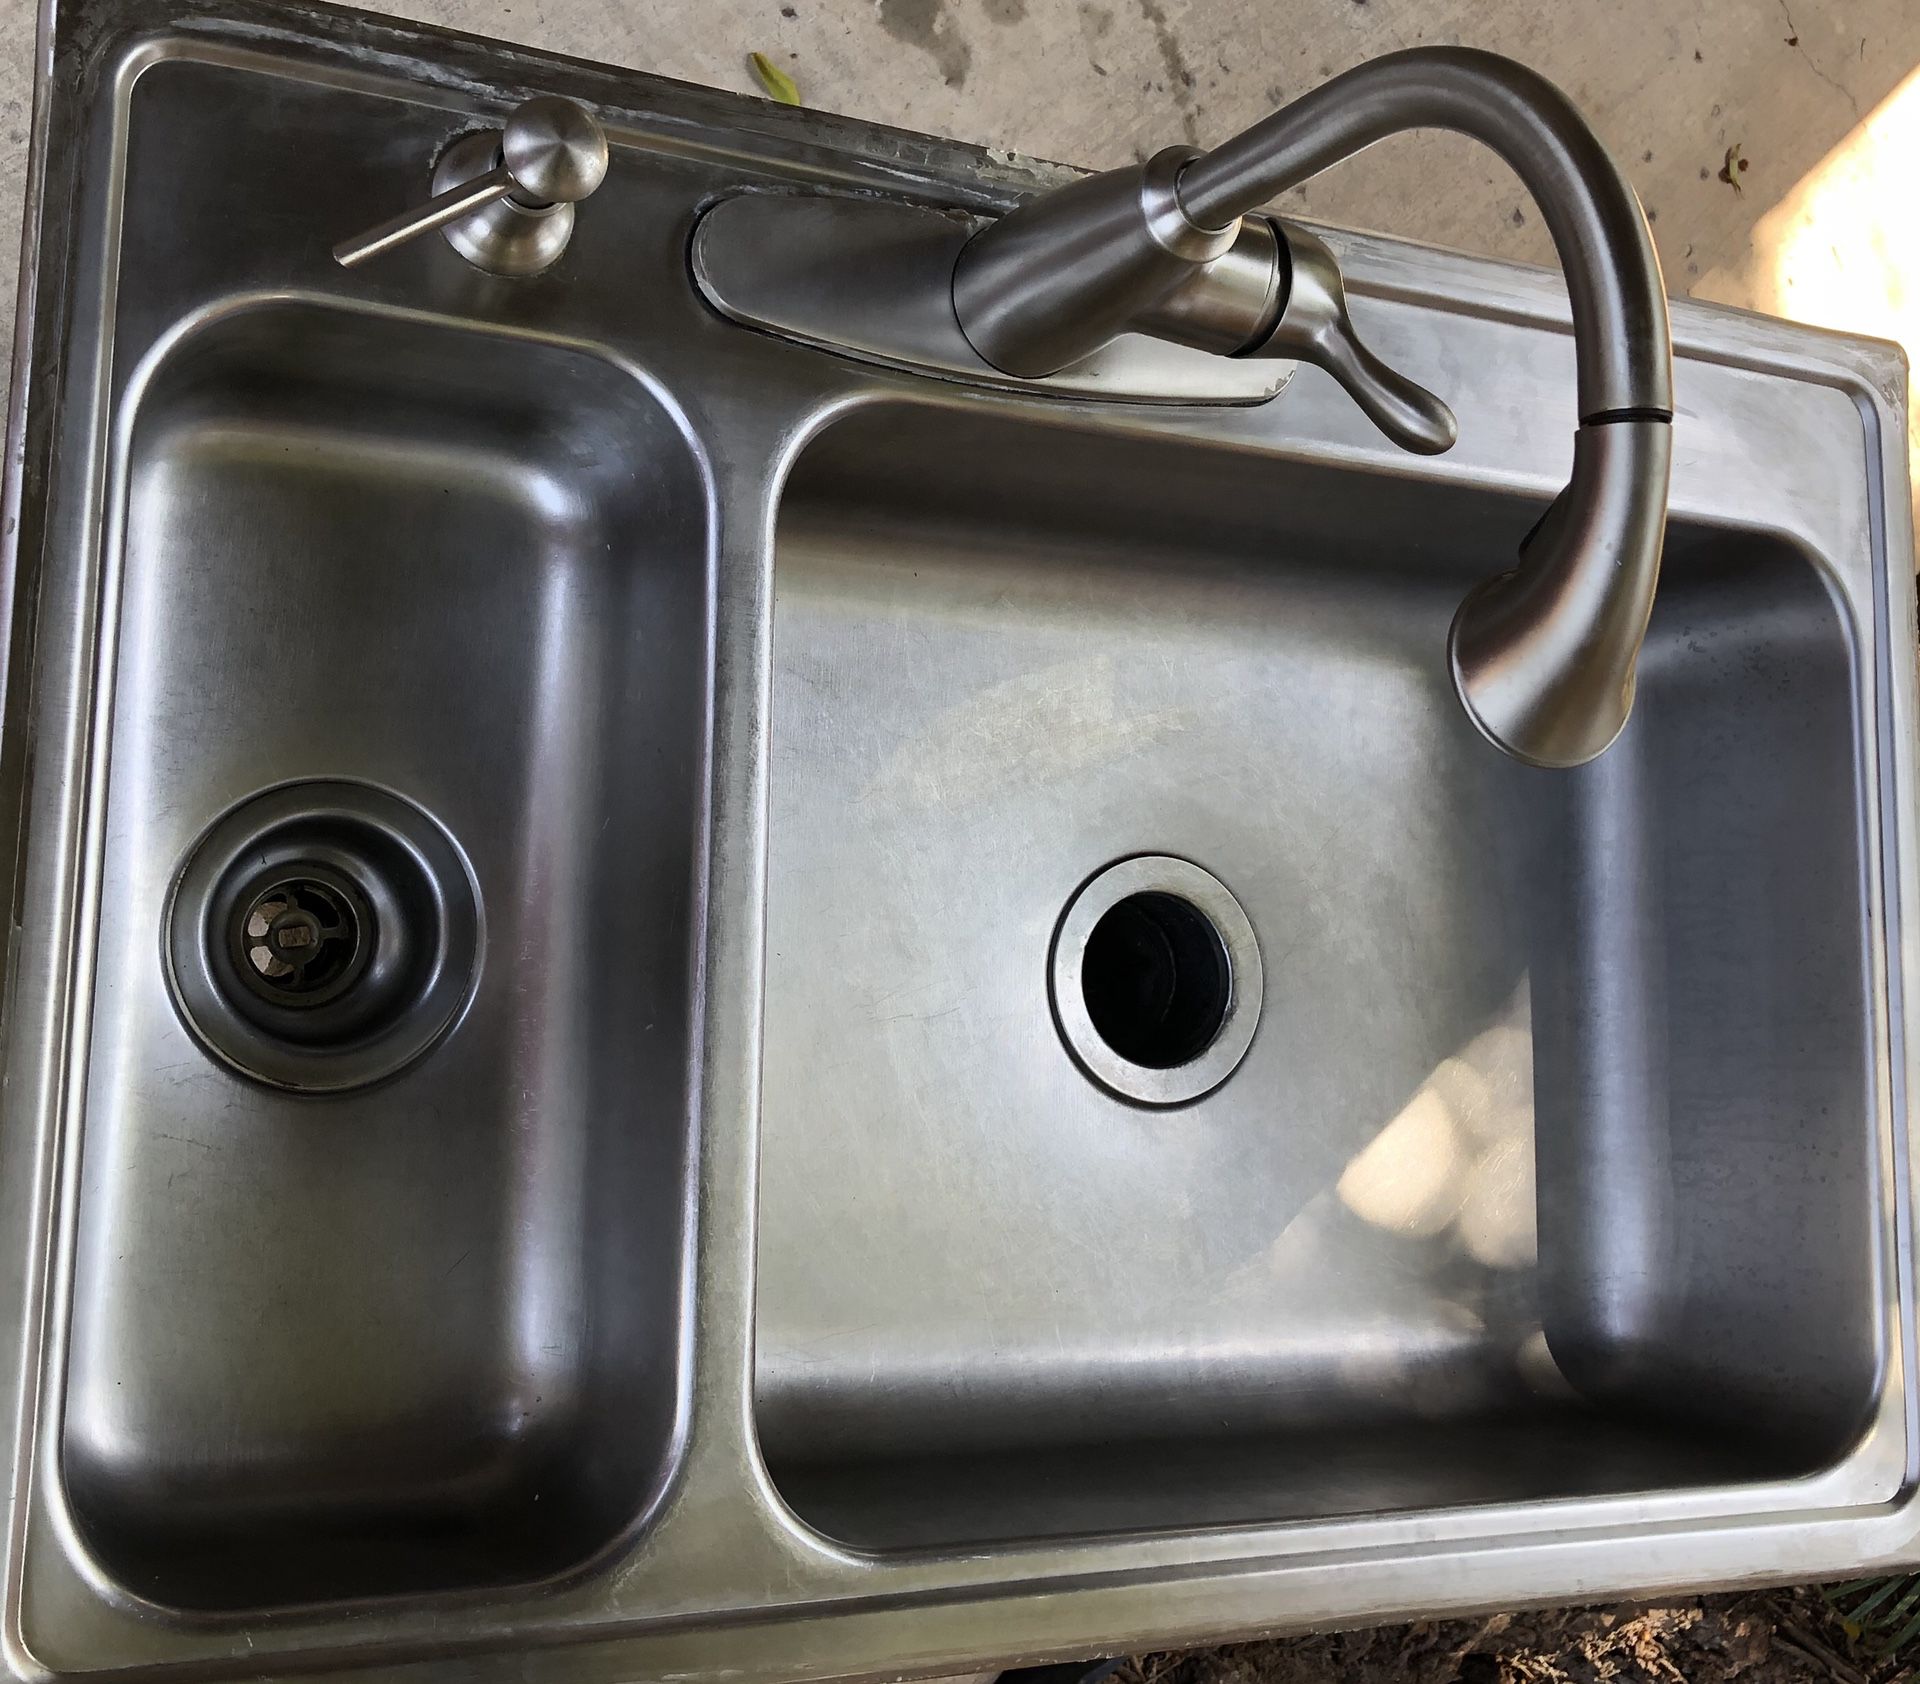 Double sink moen faucet and garbage disposal